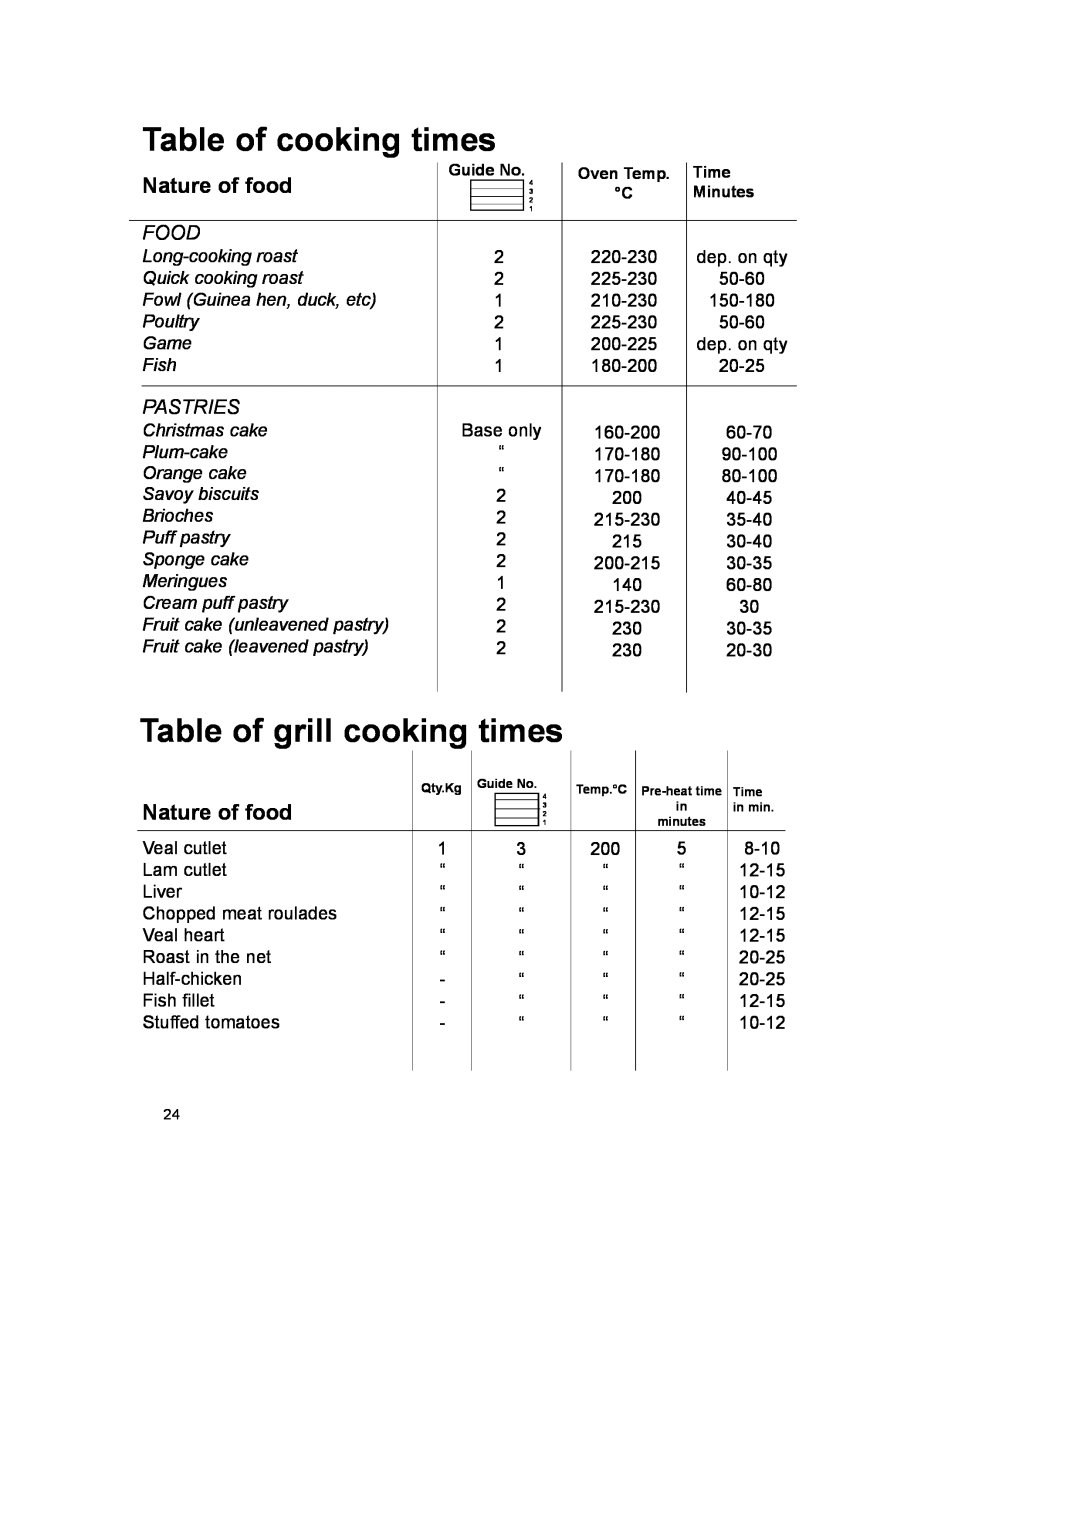 CDA SC145 manual Nature of food, Table of cooking times, Table of grill cooking times, Food, Pastries 